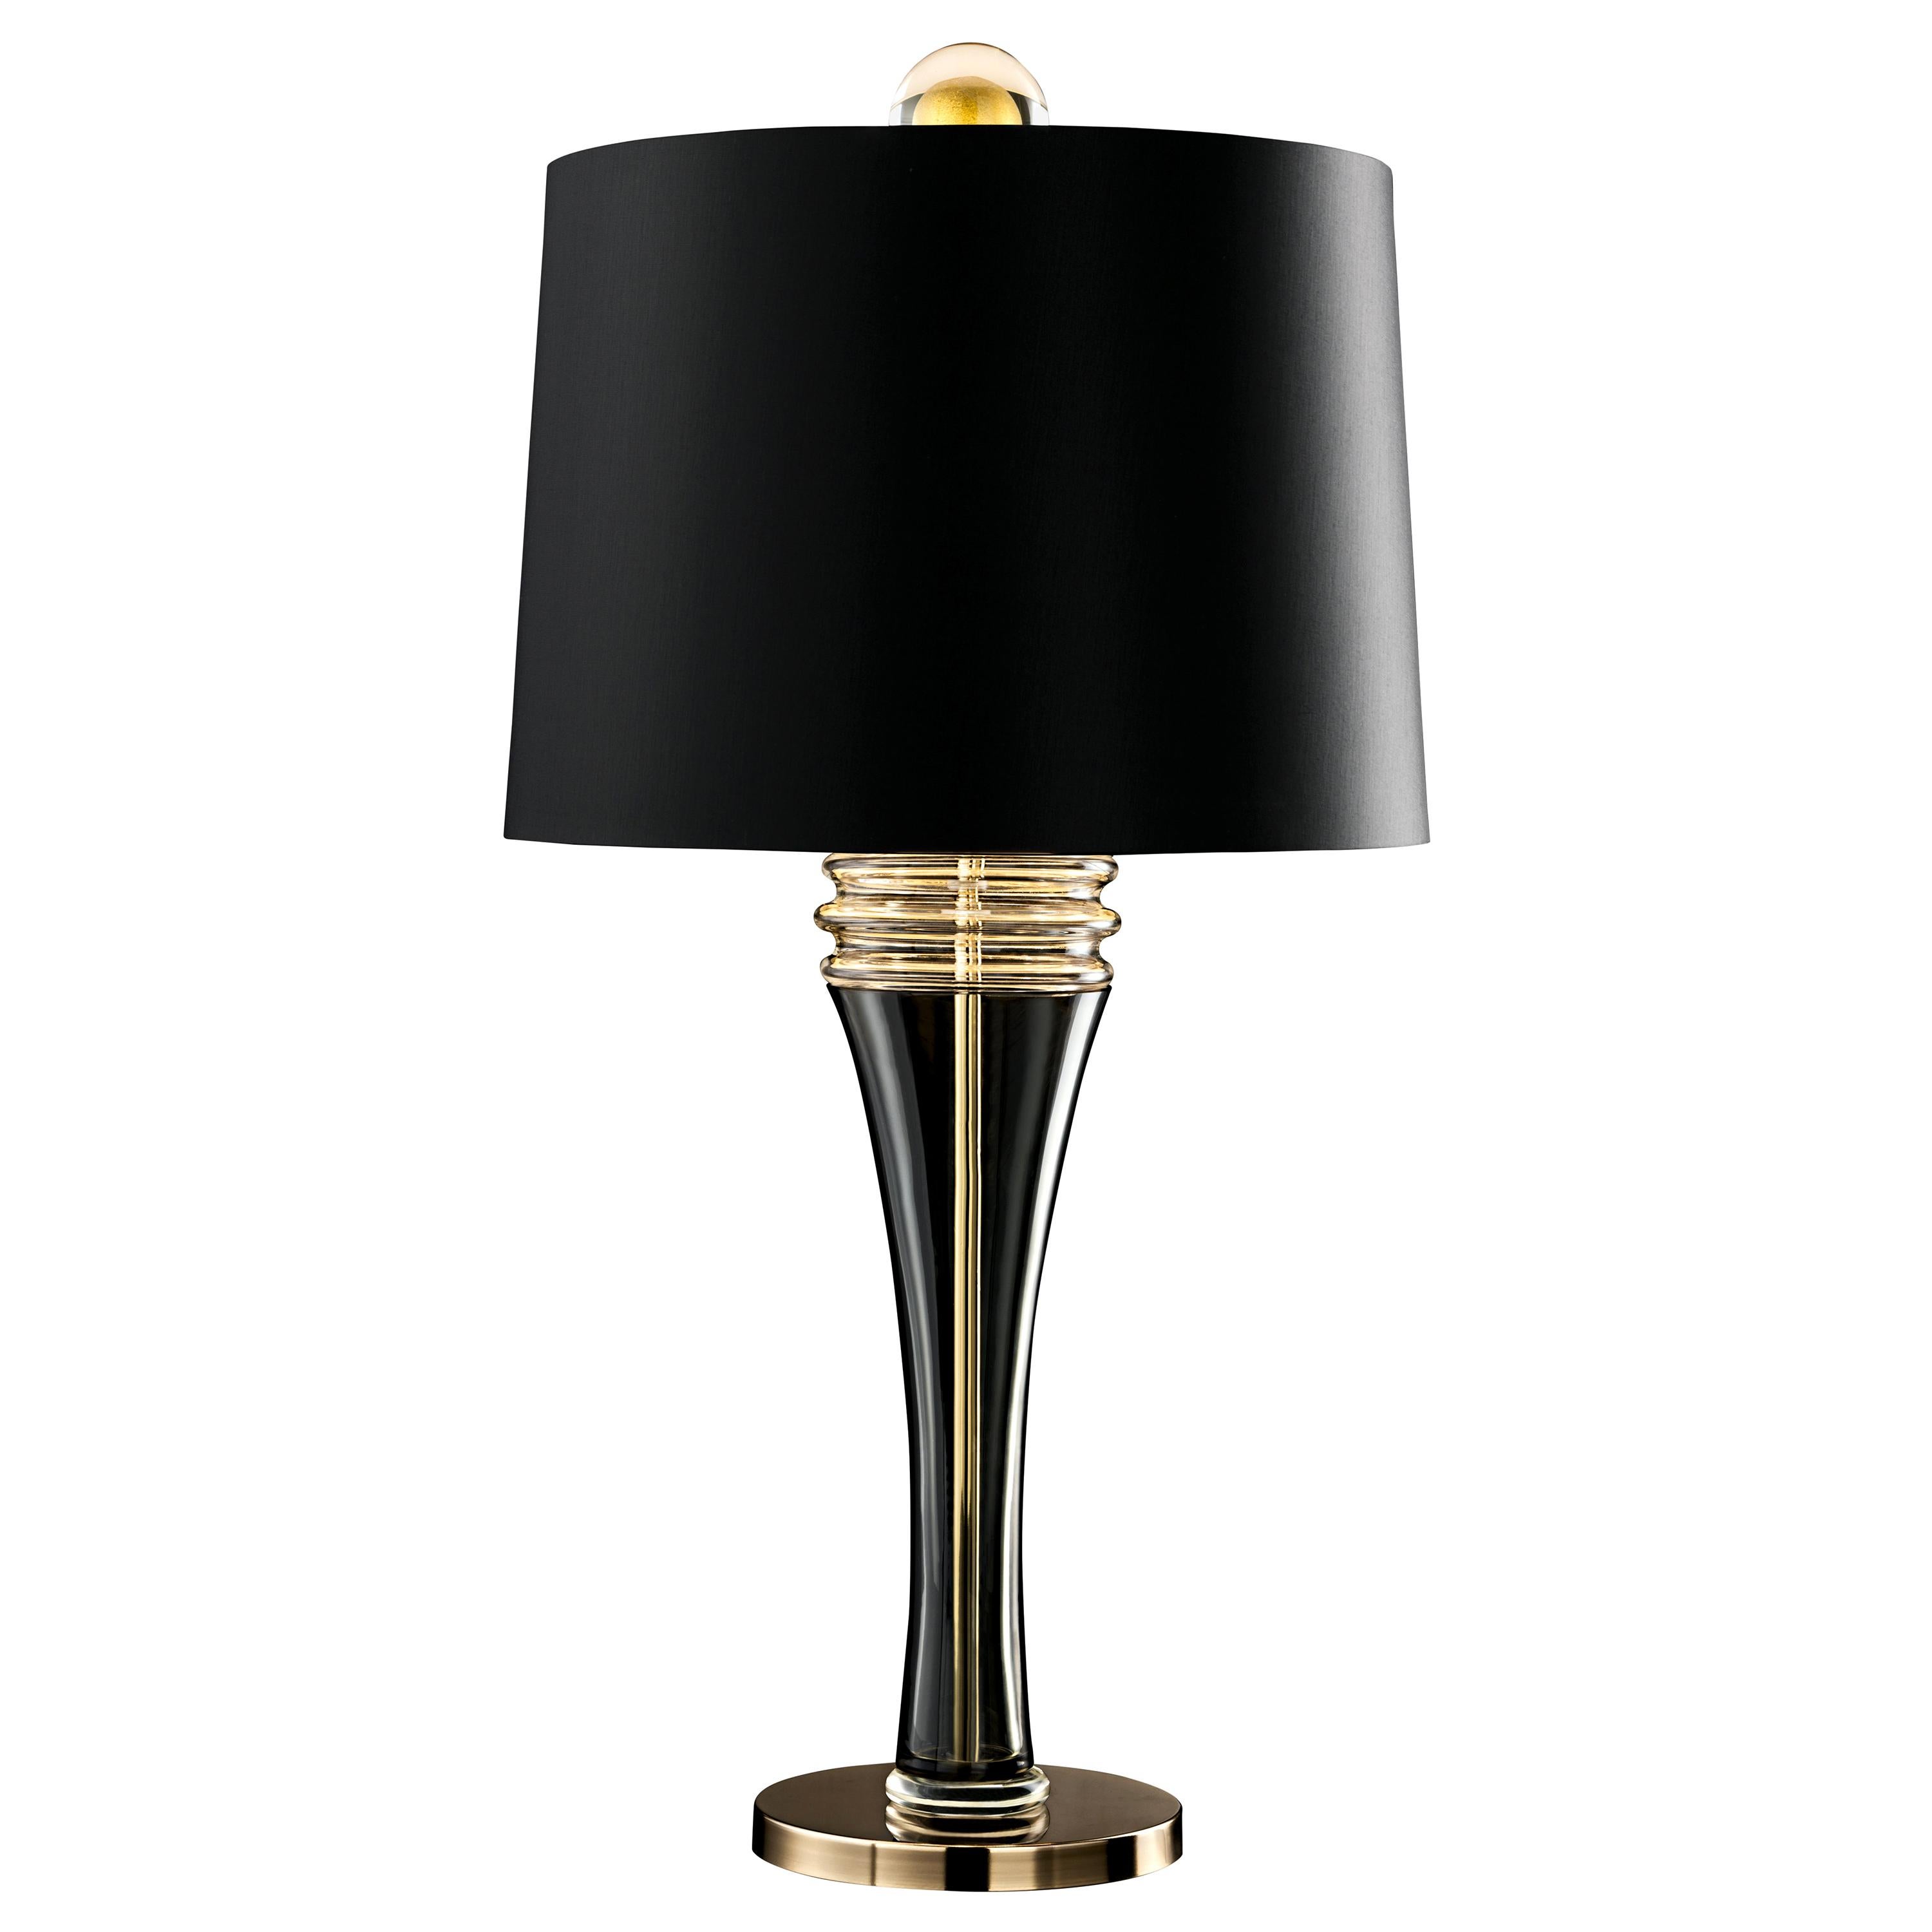 Gray (Grey_IC) Rive Gauche 7068 Table Lamp in Glass with Black Shade, by Giorgia Brusemini